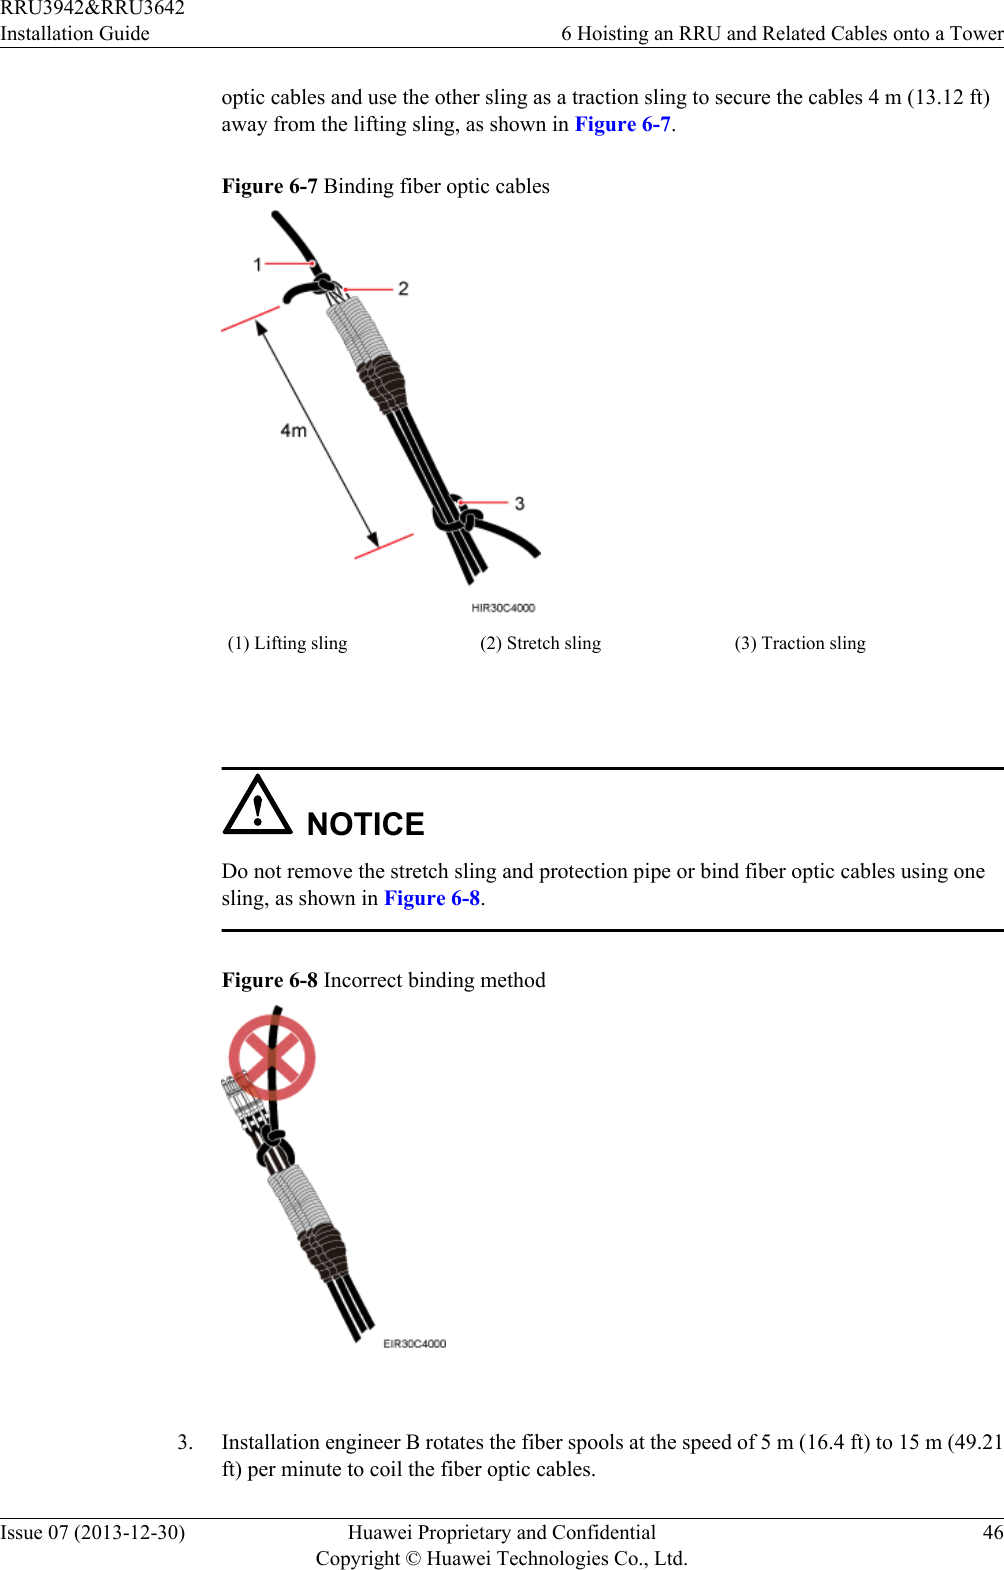 optic cables and use the other sling as a traction sling to secure the cables 4 m (13.12 ft)away from the lifting sling, as shown in Figure 6-7.Figure 6-7 Binding fiber optic cables(1) Lifting sling (2) Stretch sling (3) Traction sling NOTICEDo not remove the stretch sling and protection pipe or bind fiber optic cables using onesling, as shown in Figure 6-8.Figure 6-8 Incorrect binding method 3. Installation engineer B rotates the fiber spools at the speed of 5 m (16.4 ft) to 15 m (49.21ft) per minute to coil the fiber optic cables.RRU3942&amp;RRU3642Installation Guide 6 Hoisting an RRU and Related Cables onto a TowerIssue 07 (2013-12-30) Huawei Proprietary and ConfidentialCopyright © Huawei Technologies Co., Ltd.46